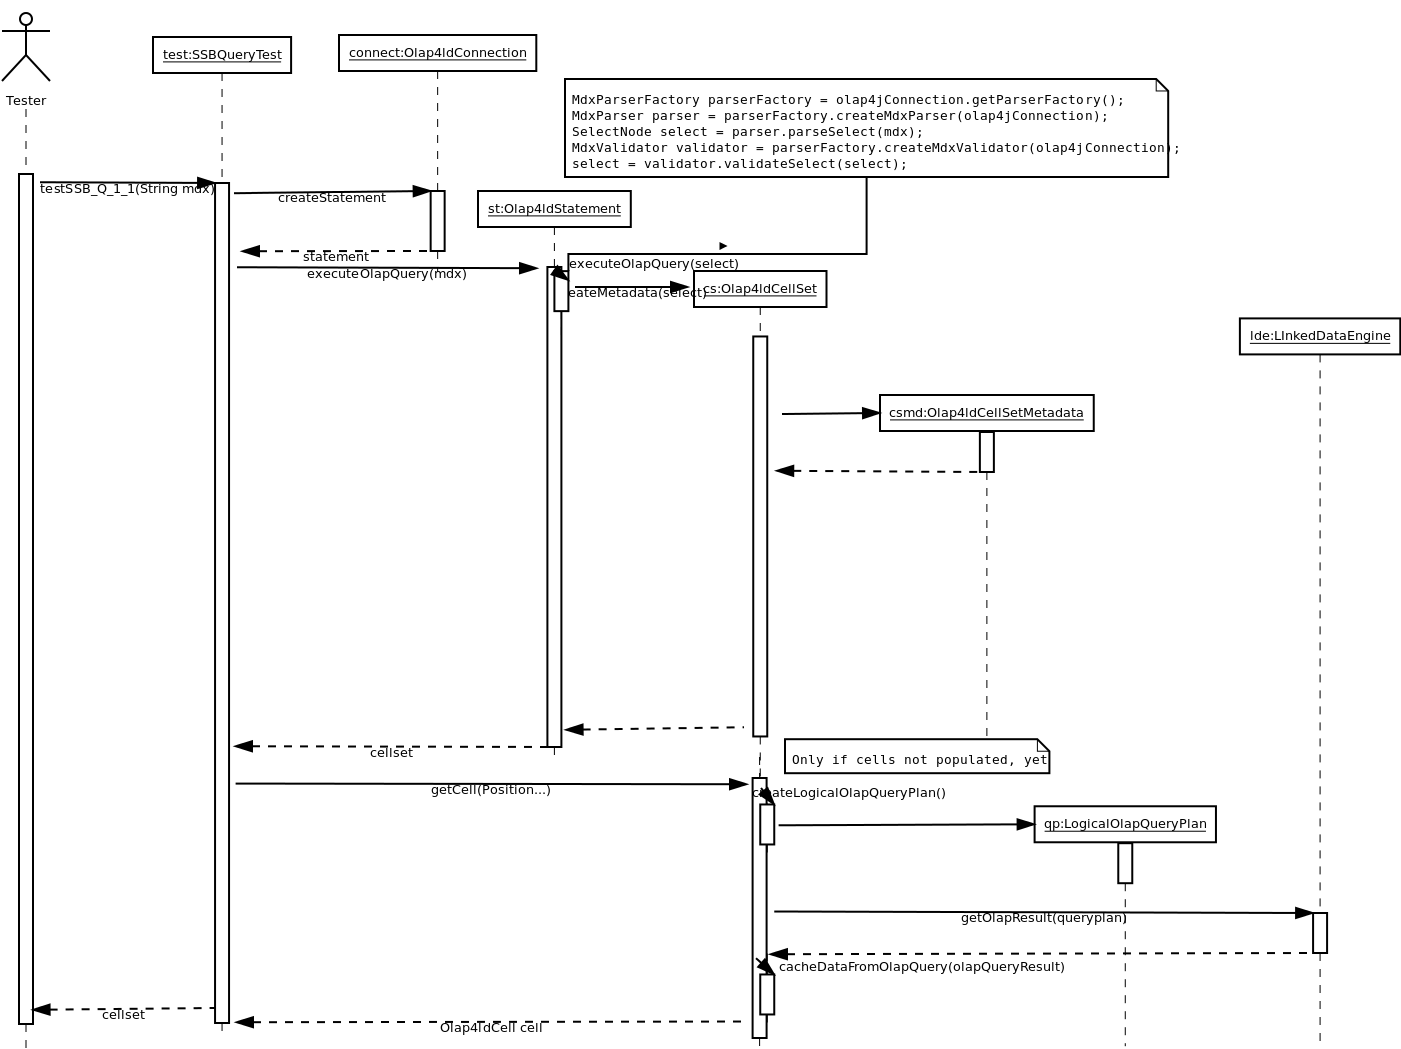 Olap4ld olap query sequence diagram v2.png